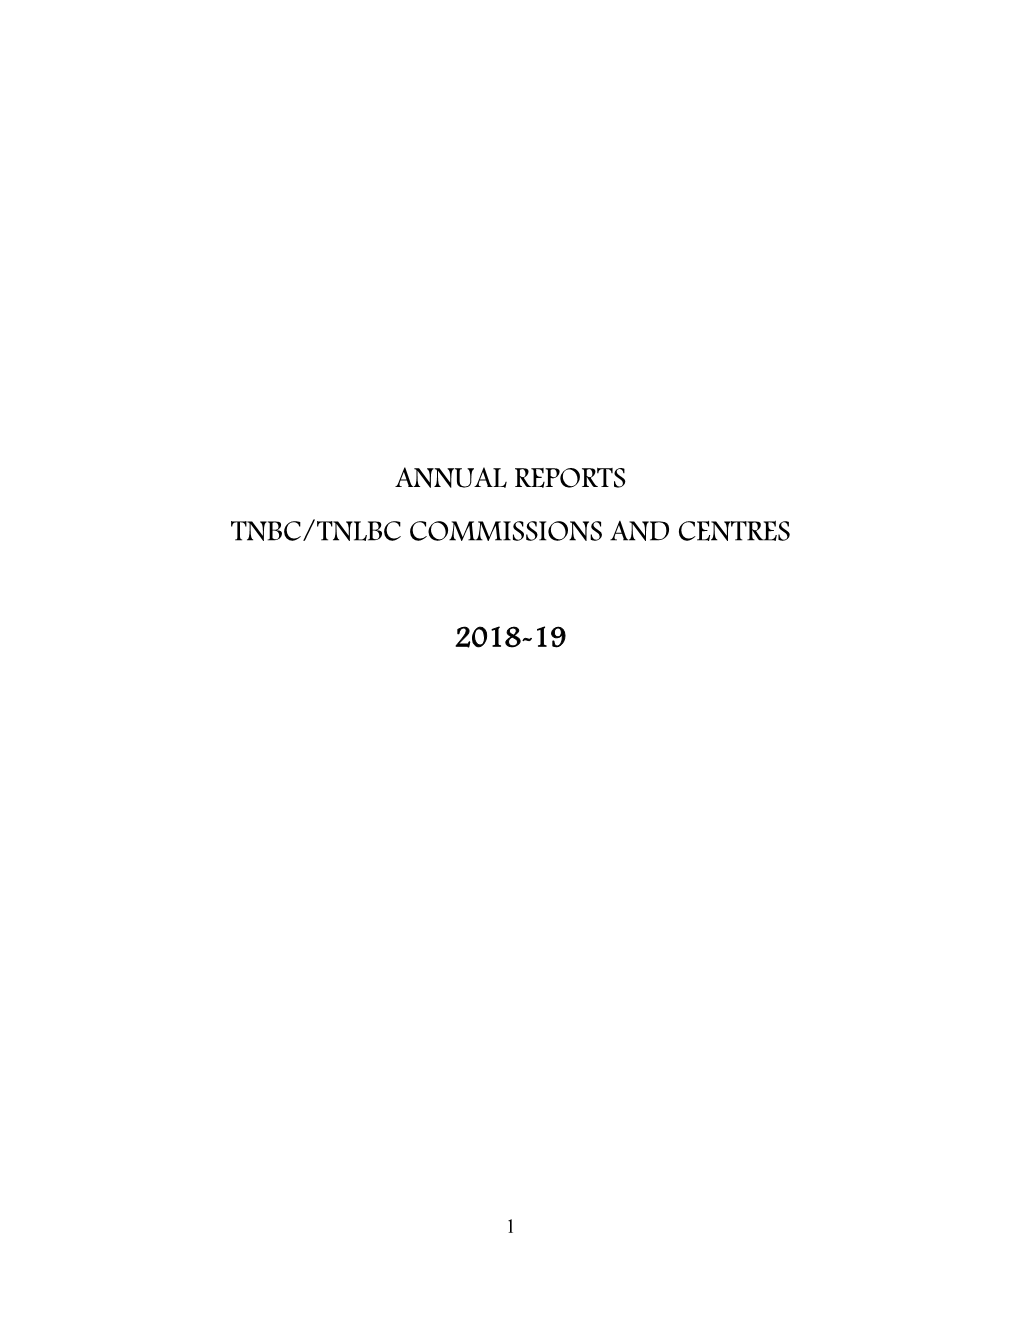 Annual Reports Tnbc/Tnlbc Commissions and Centres